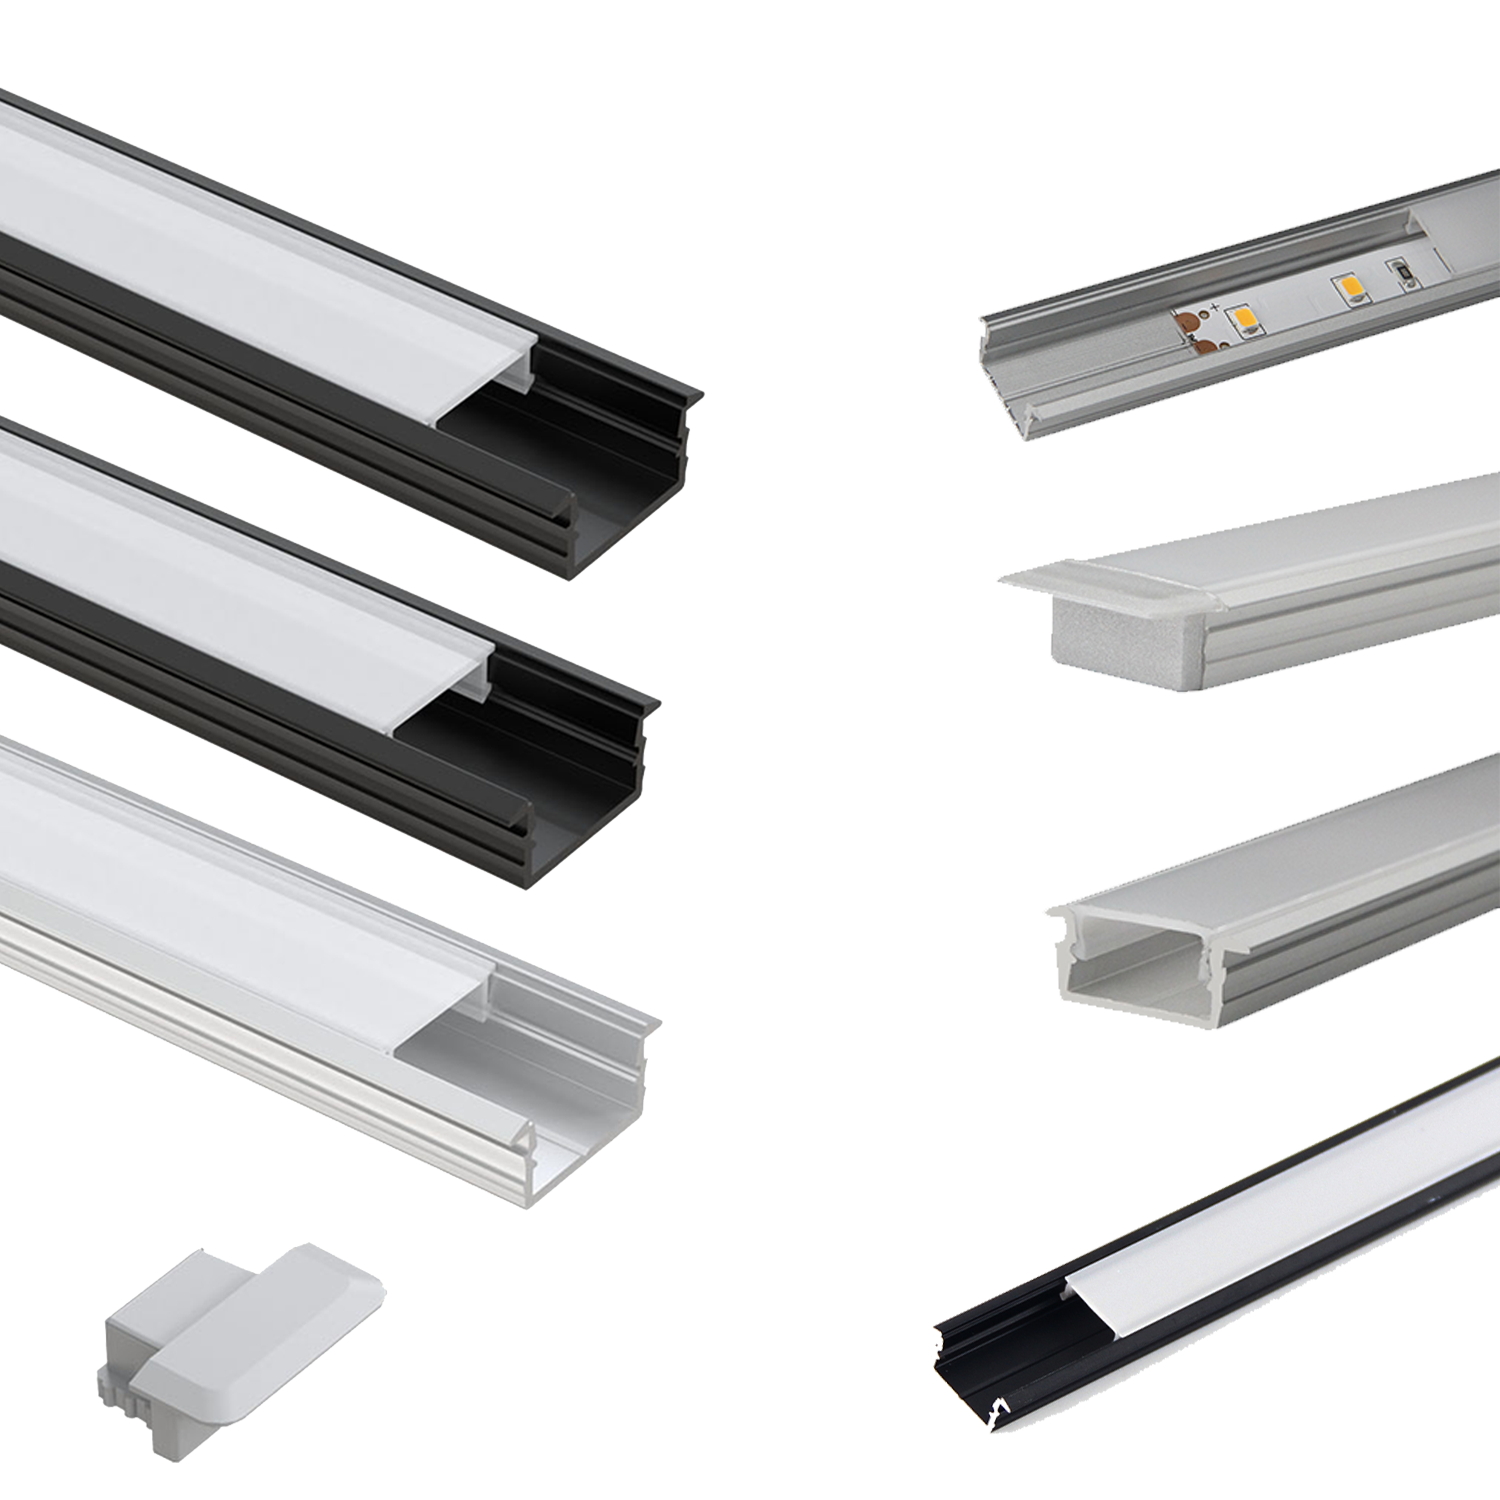 High Quality Cabinet Customized Aluminum Channel Profile For LED Light Alu 6063 Indoor Lighting